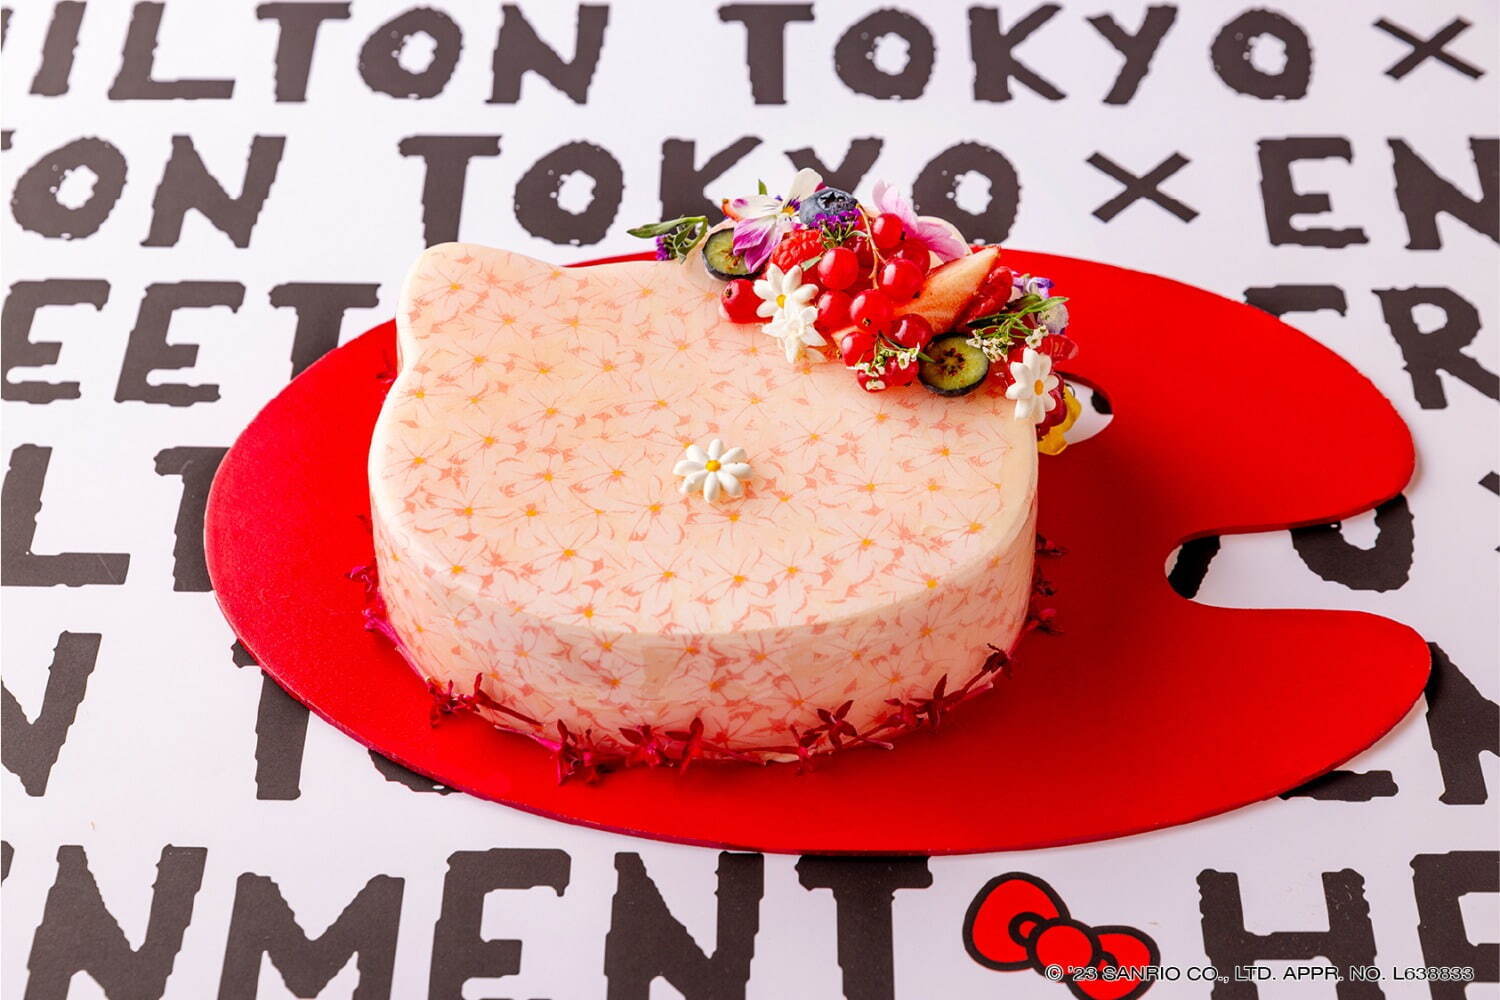 Hello Kitty in Sweets Gallery at Hilton Tokyo